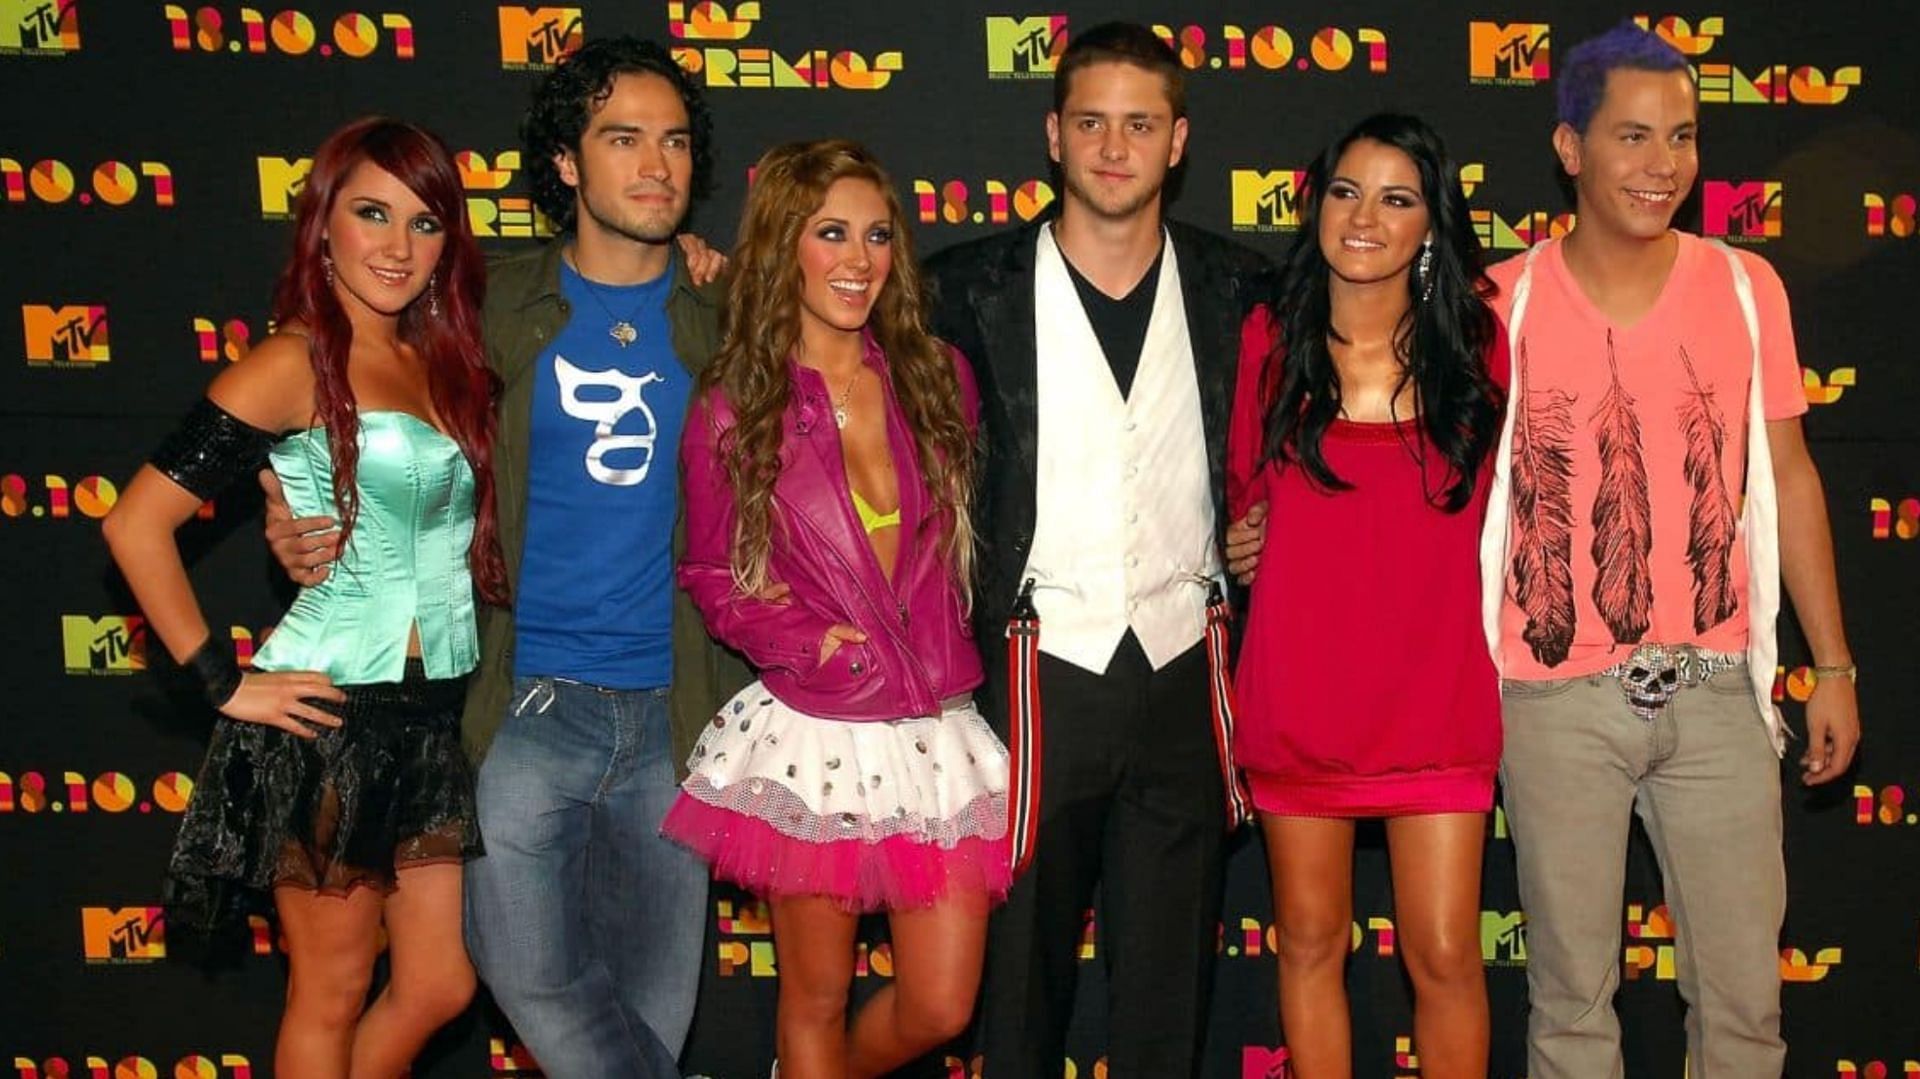 RBD Soy Rebelde Tour 2023 Tickets, where to buy, dates, venues, and more